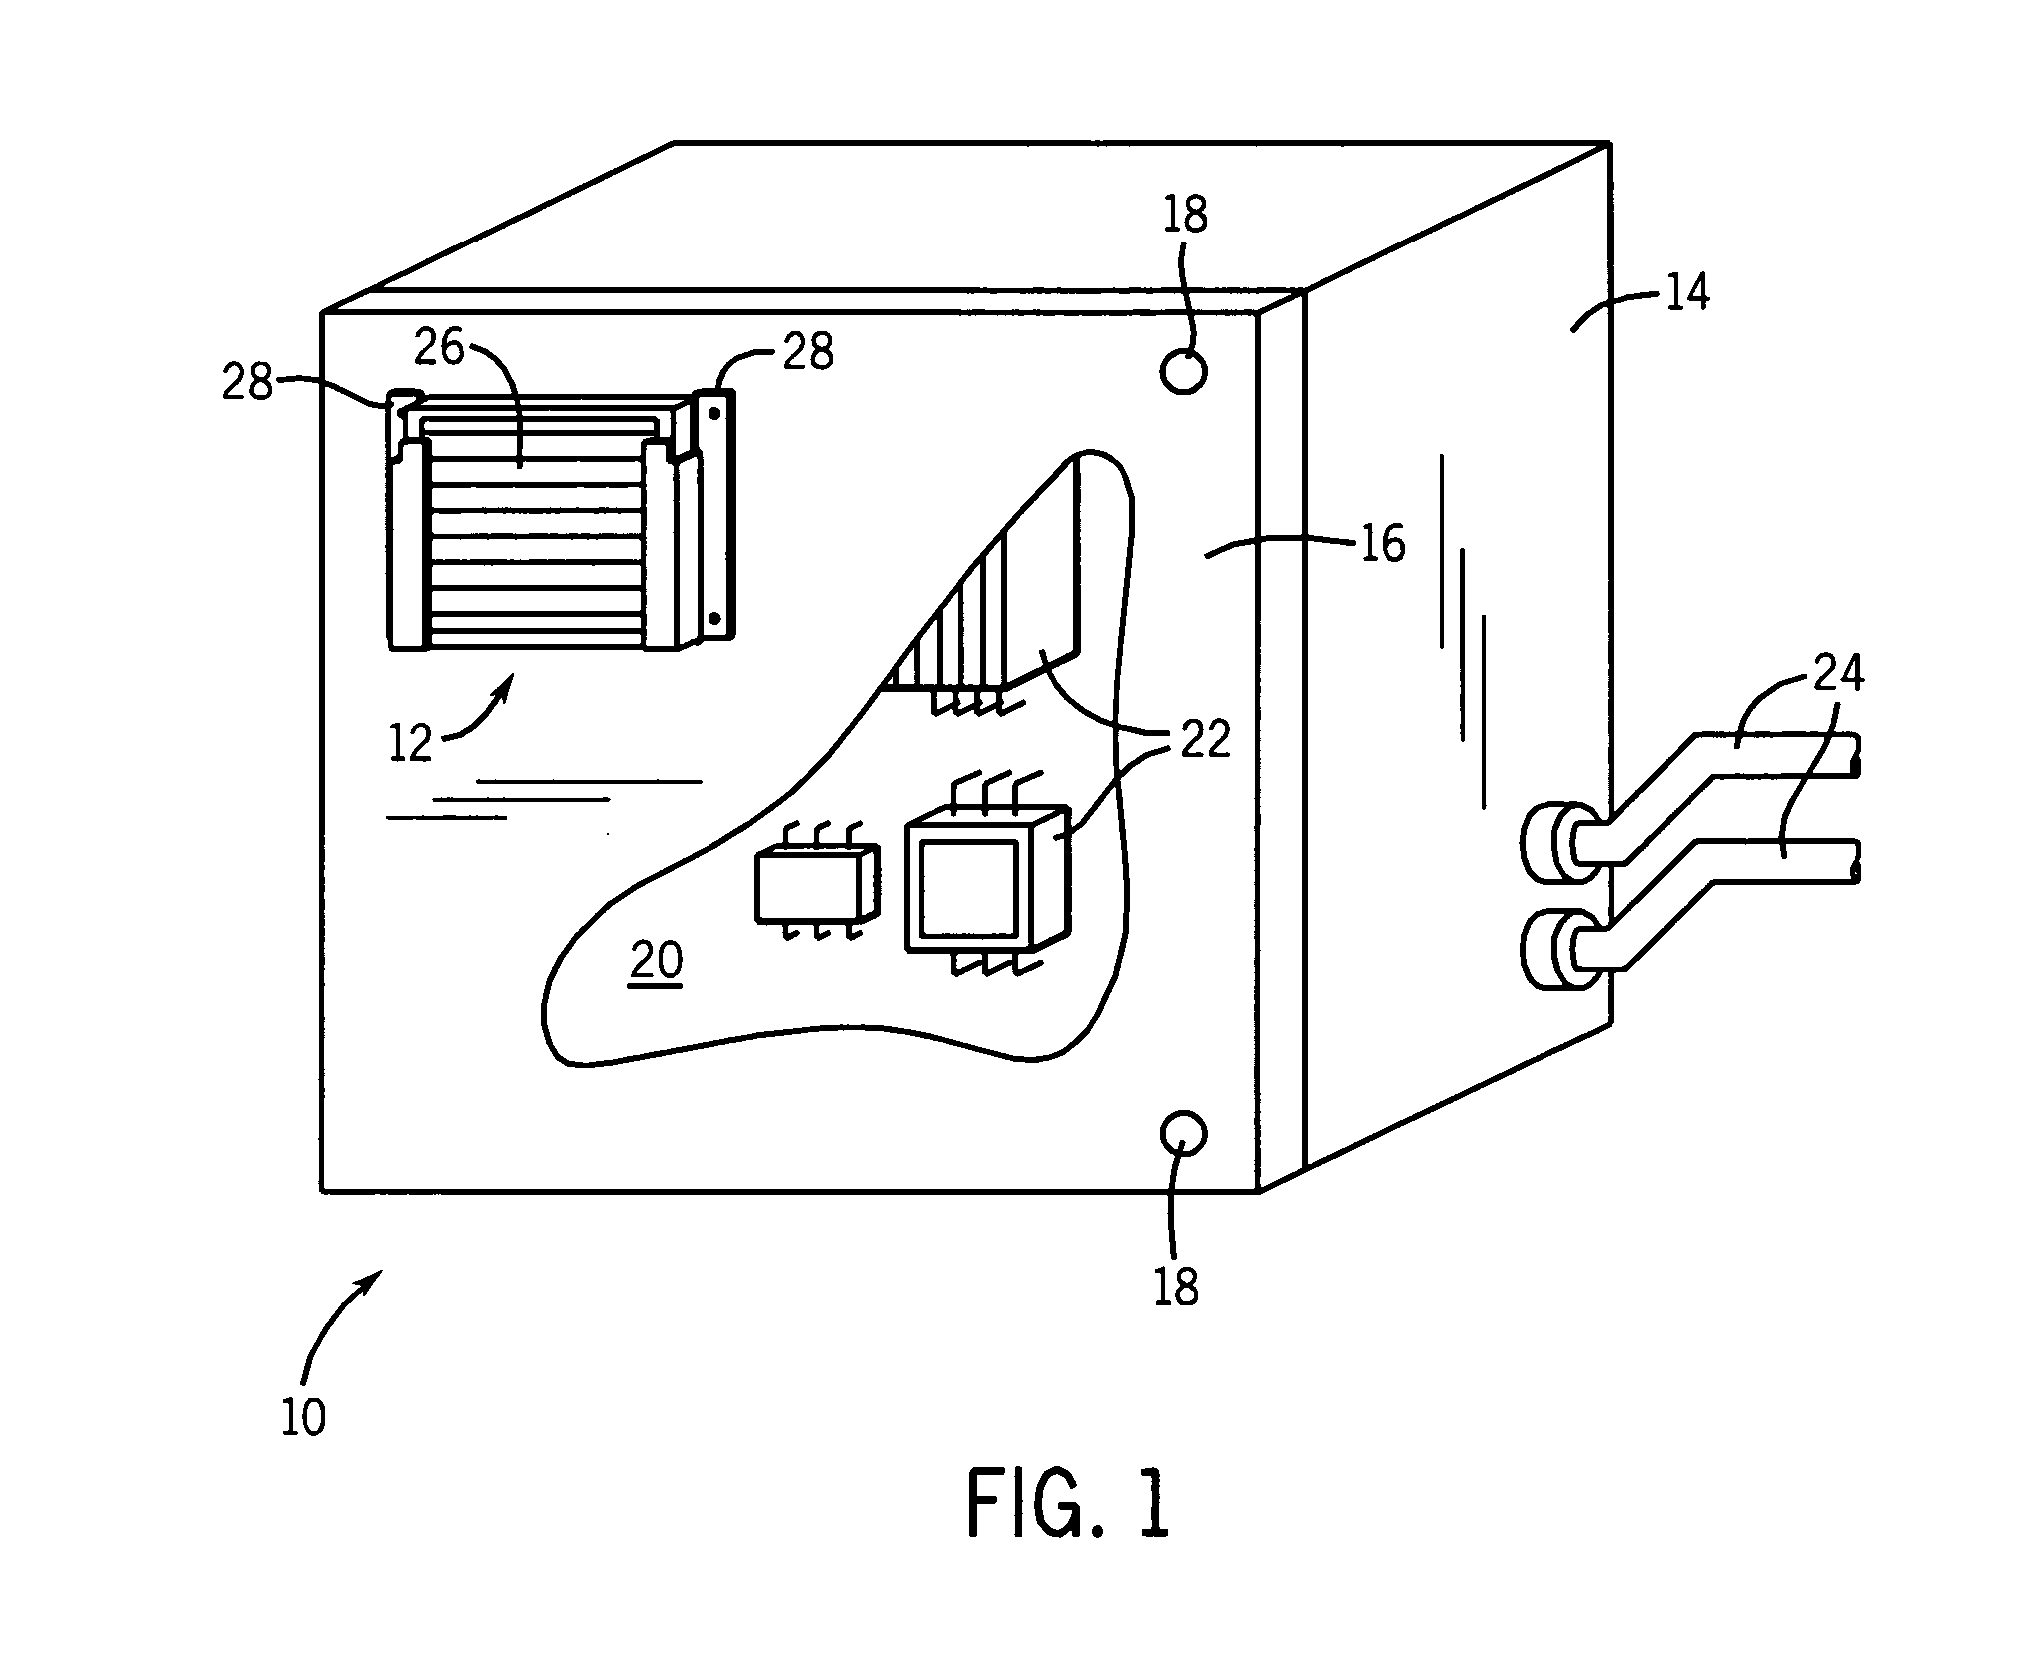 Arc resistant baffle for reducing arc-flash energy in an electrical enclosure